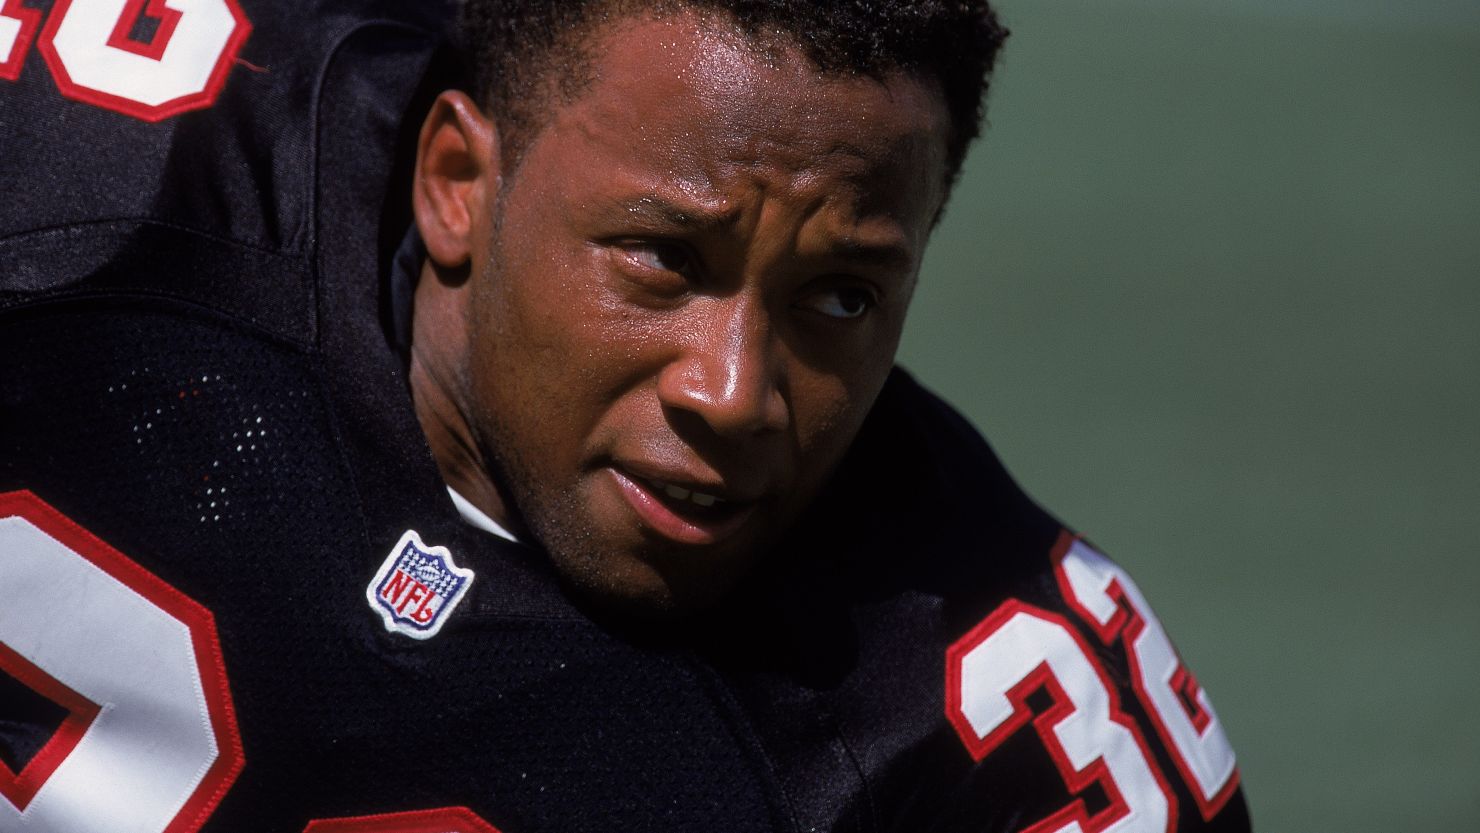 Atlanta Falcons player Jamal Anderson has added his name to a lawsuit against the NFL.